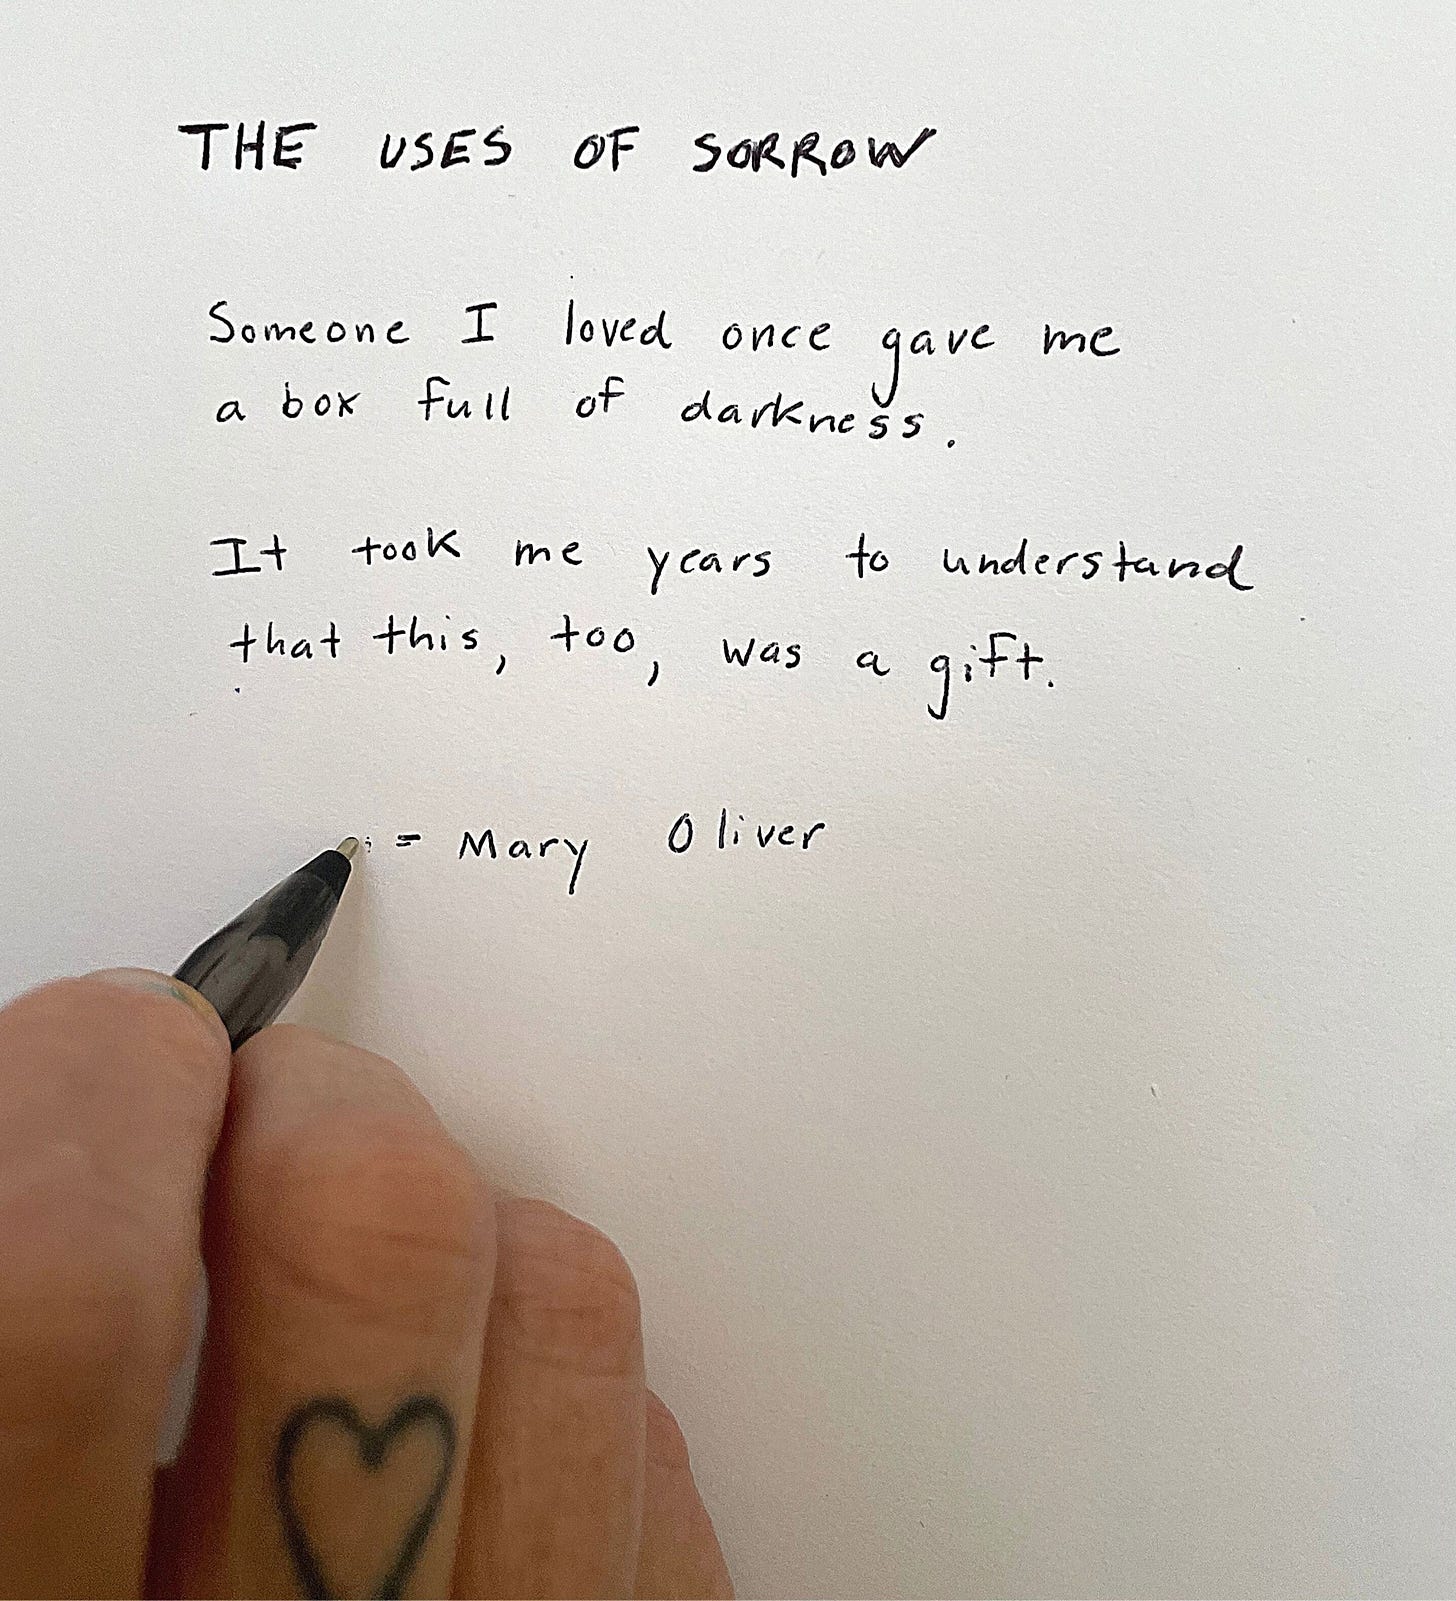 Andrea’s hand with a heart tattoo above their middle finger knuckle and pen in hand writing a quote. The quote reads: “ THE USES OF SORROW Someone I loved once gave me a box full of darkness. It took me years to understand that this, too, was a gift. - Mary Oliver”